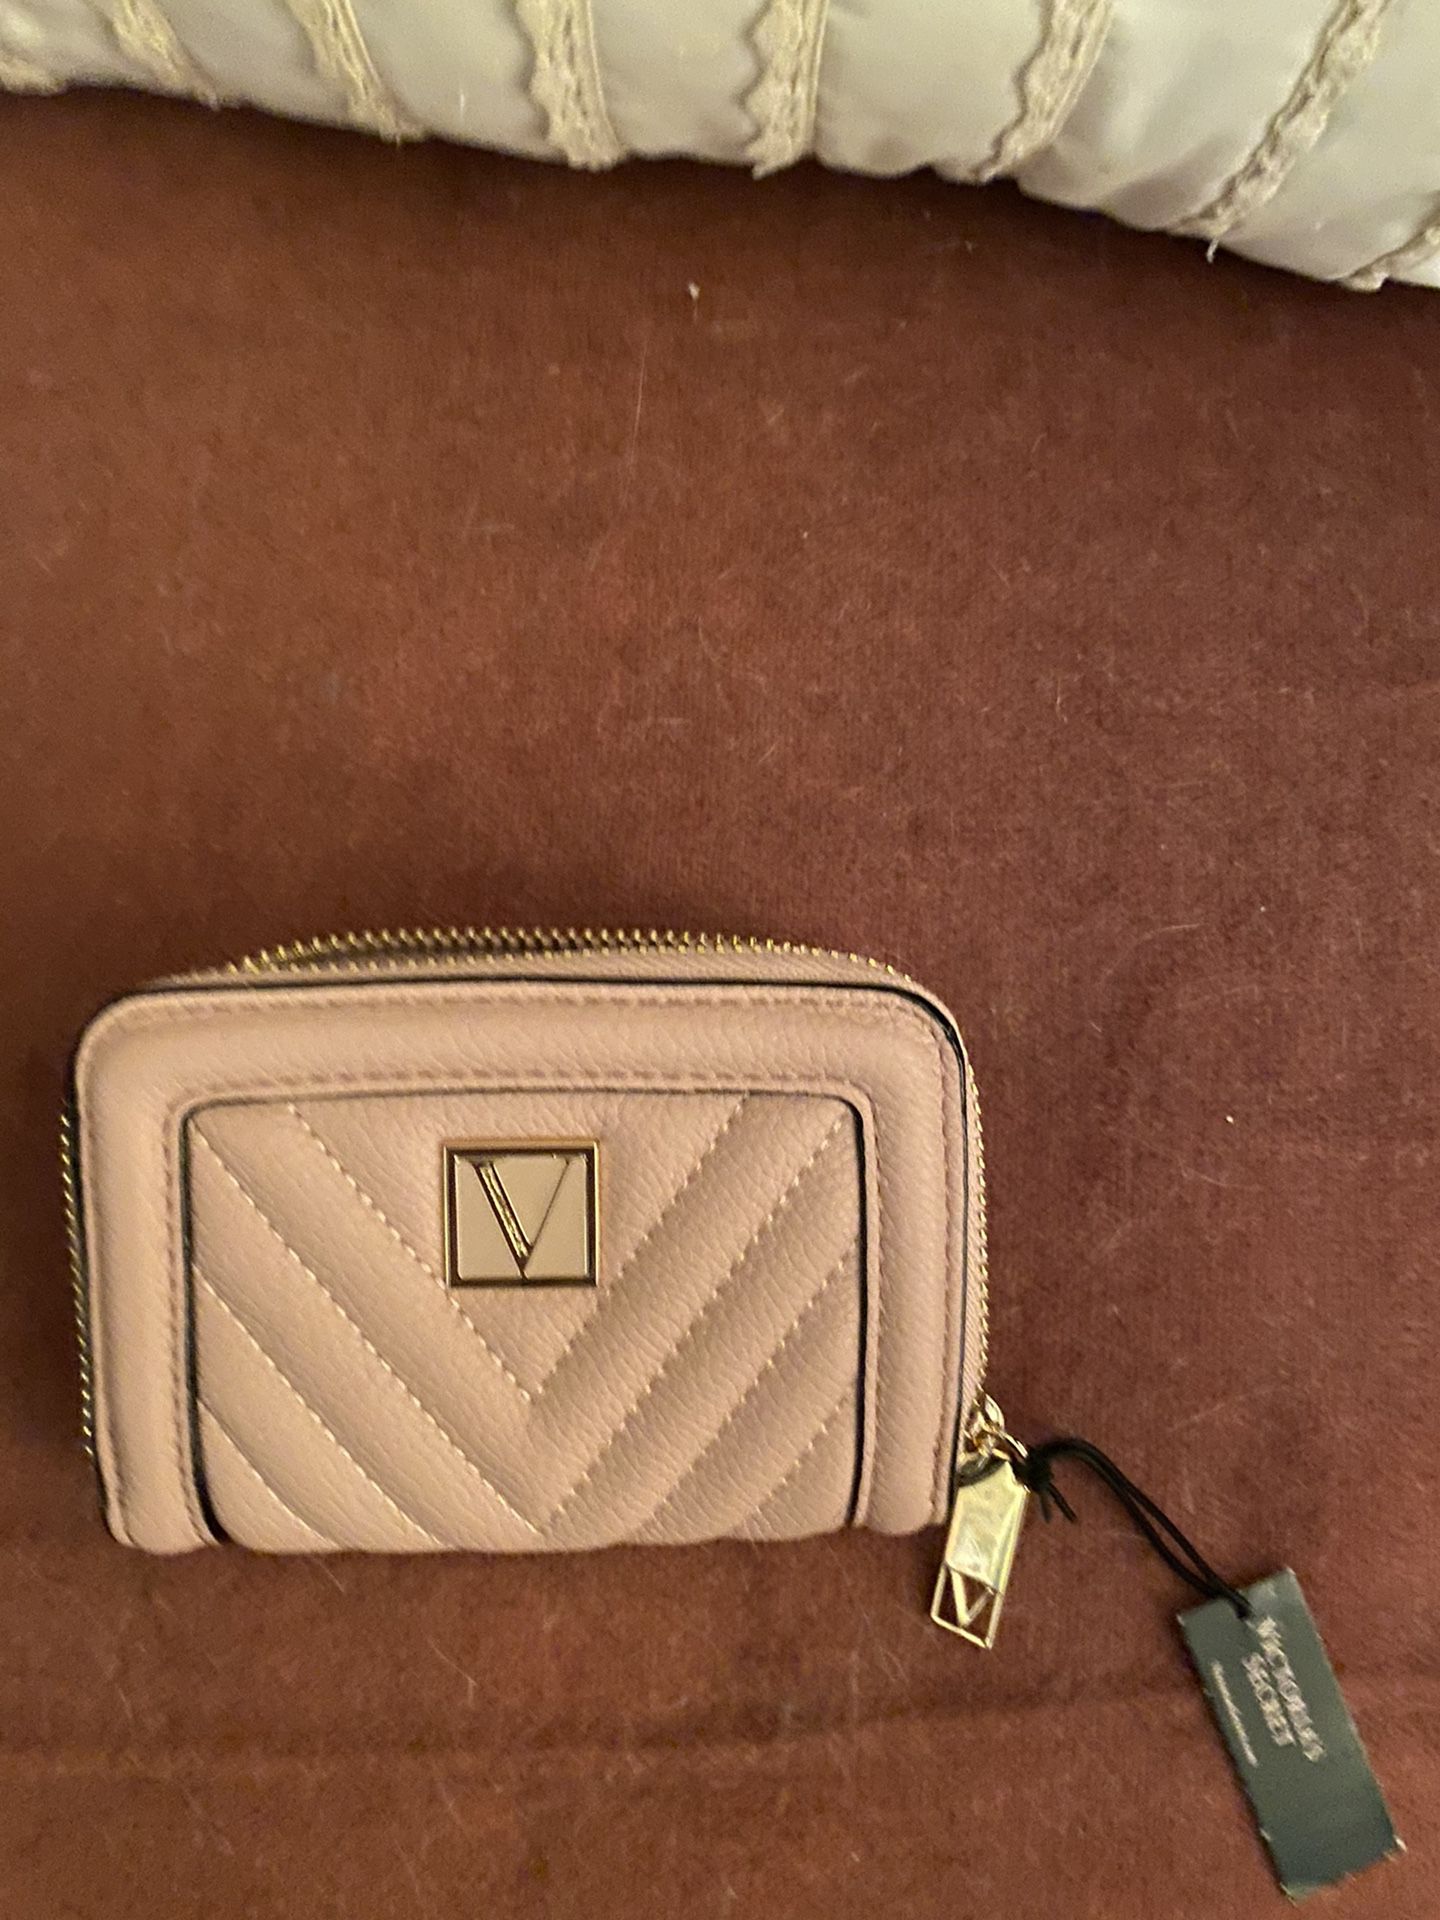 Brand New VS Blush Colored Zipper Small Wallet With Card Slots